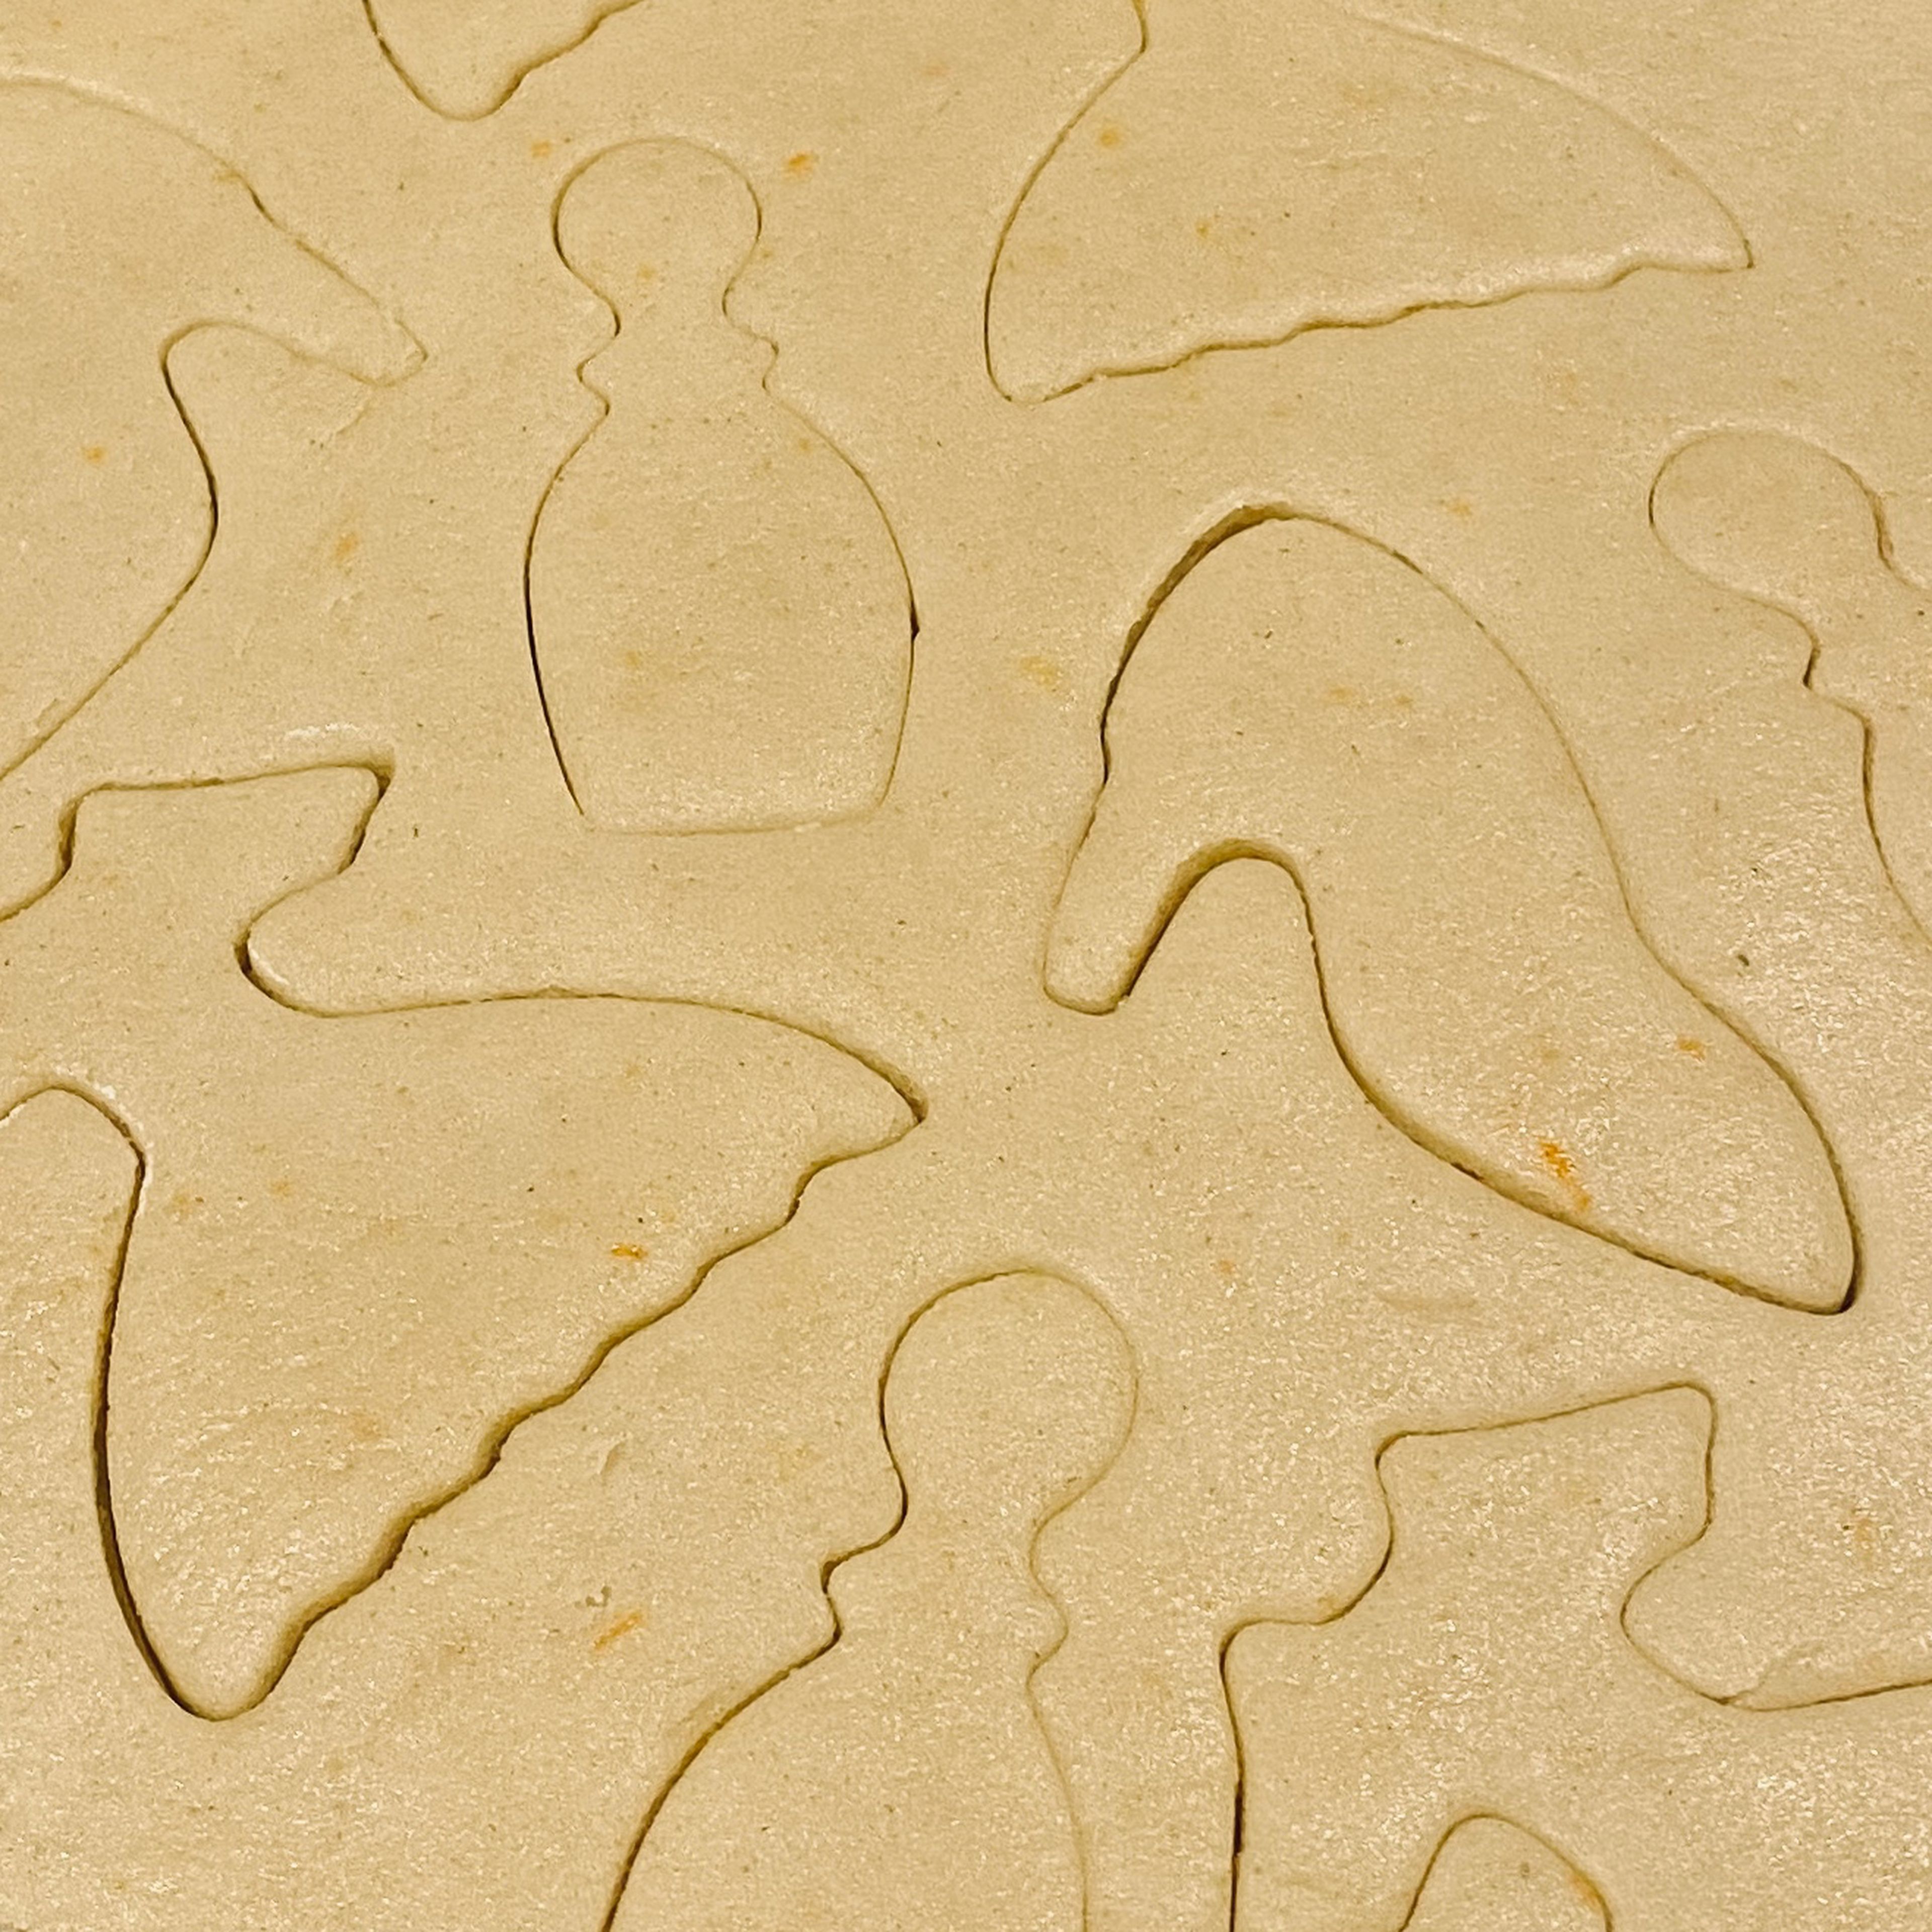 Add a light wash of flour over your counter top and roll out your dough to 1/4 inches thick. The get any style cookie cutter you own and start pressing the shape into the dough.